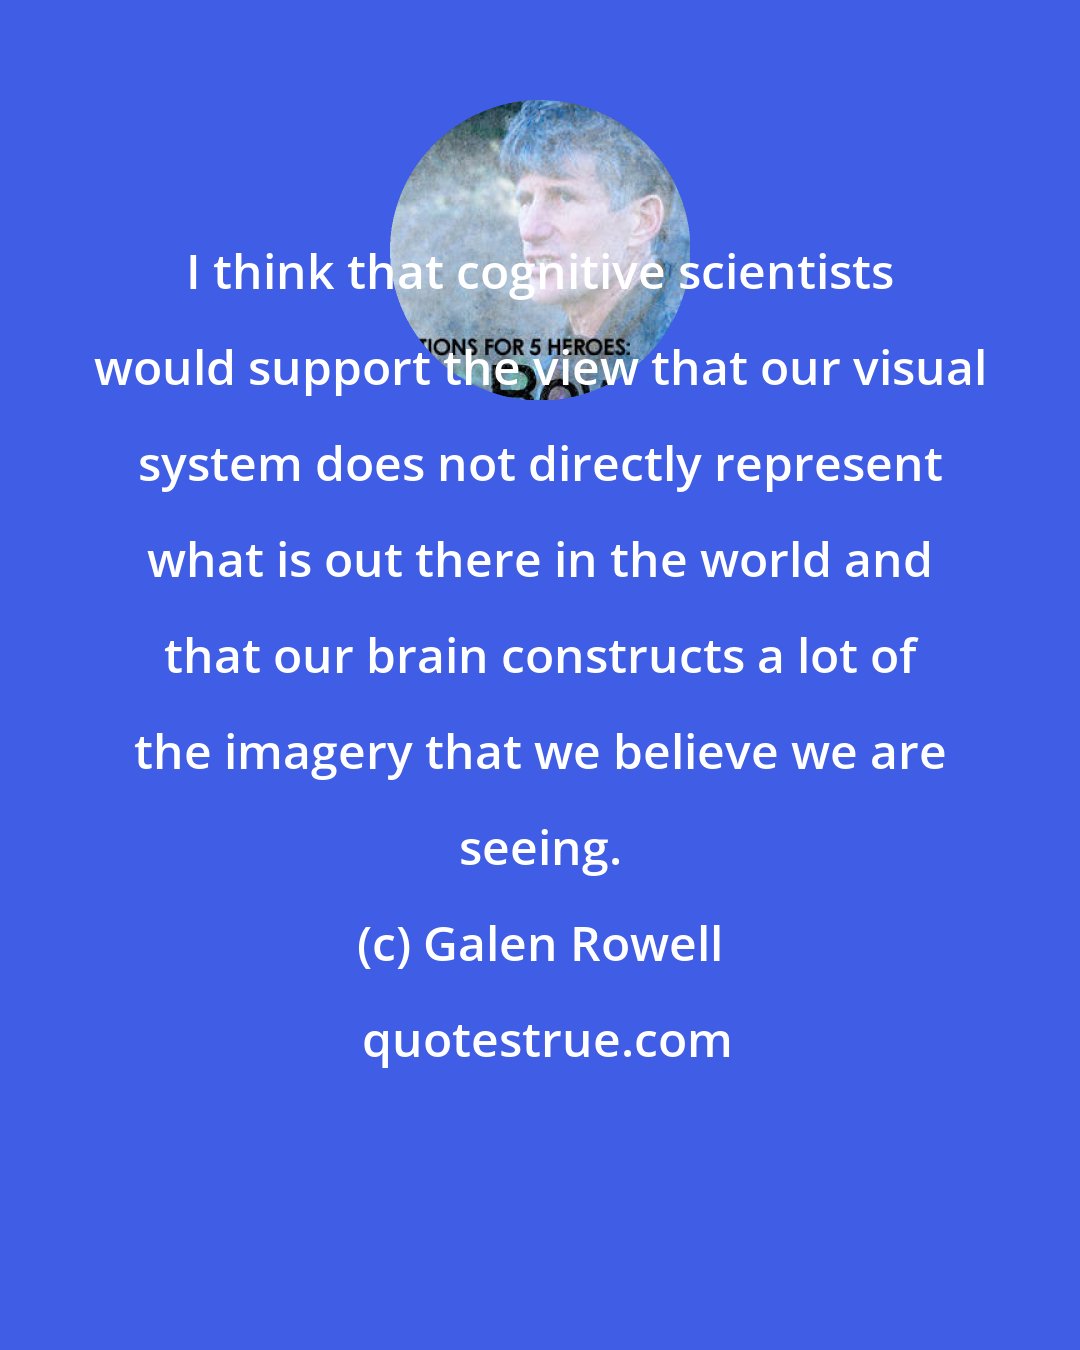 Galen Rowell: I think that cognitive scientists would support the view that our visual system does not directly represent what is out there in the world and that our brain constructs a lot of the imagery that we believe we are seeing.